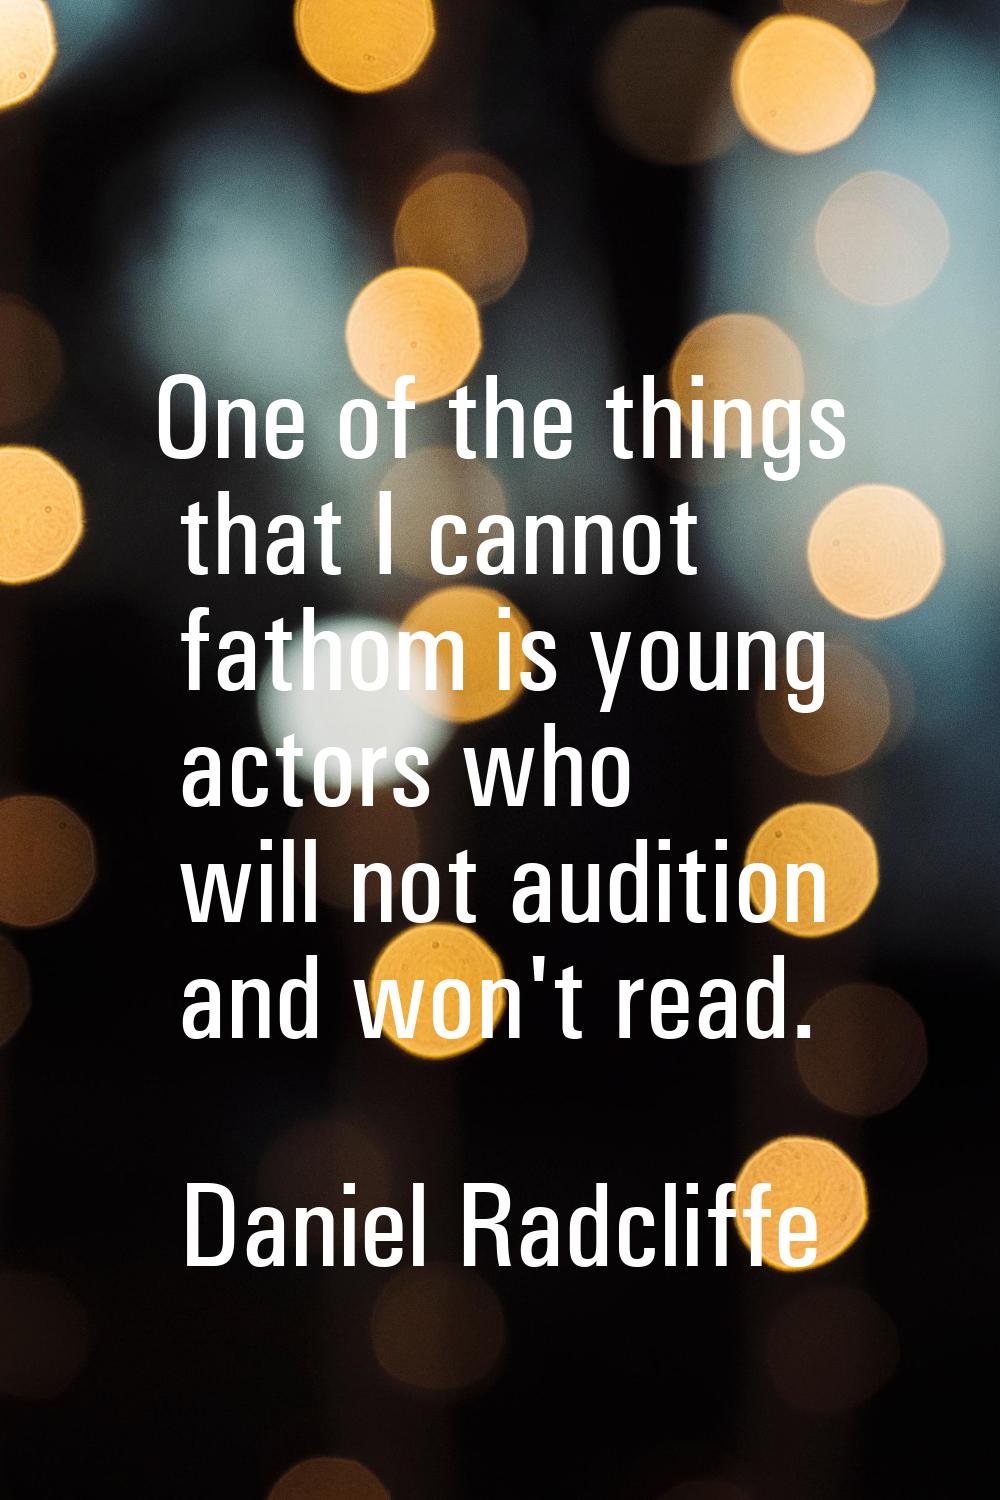 One of the things that I cannot fathom is young actors who will not audition and won't read.